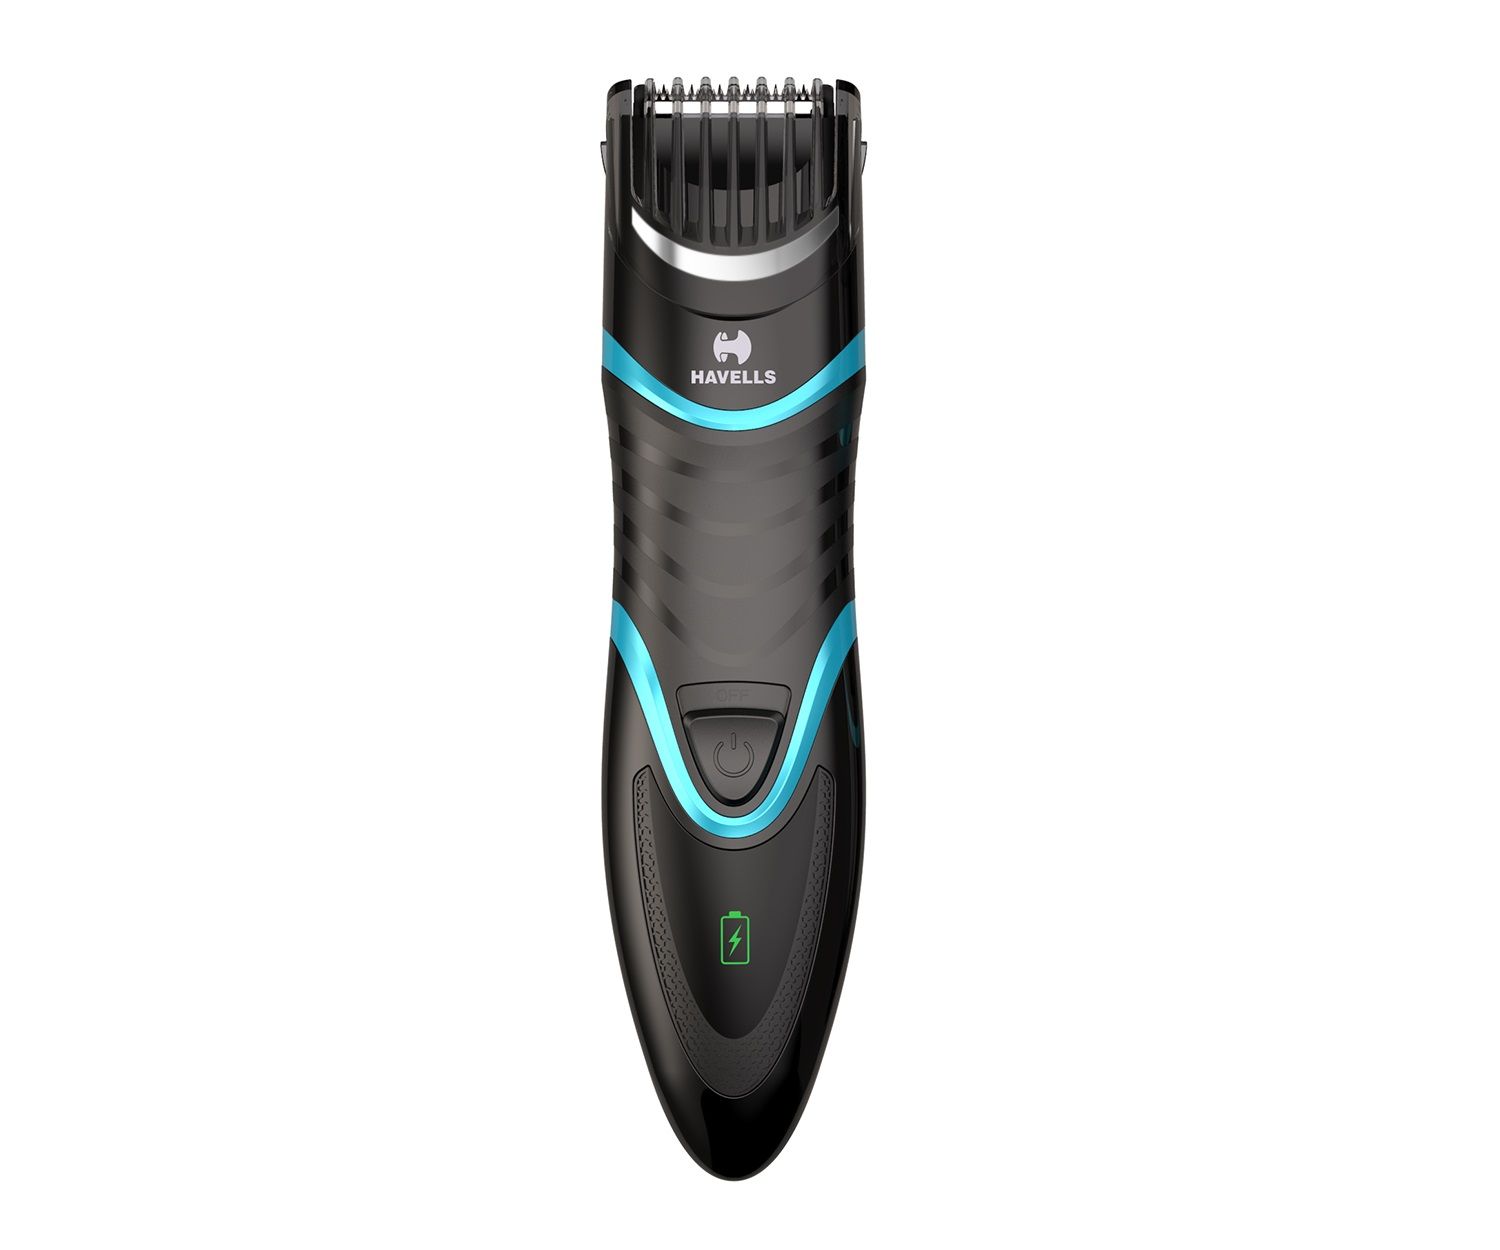 havells bt9005 trimmer review